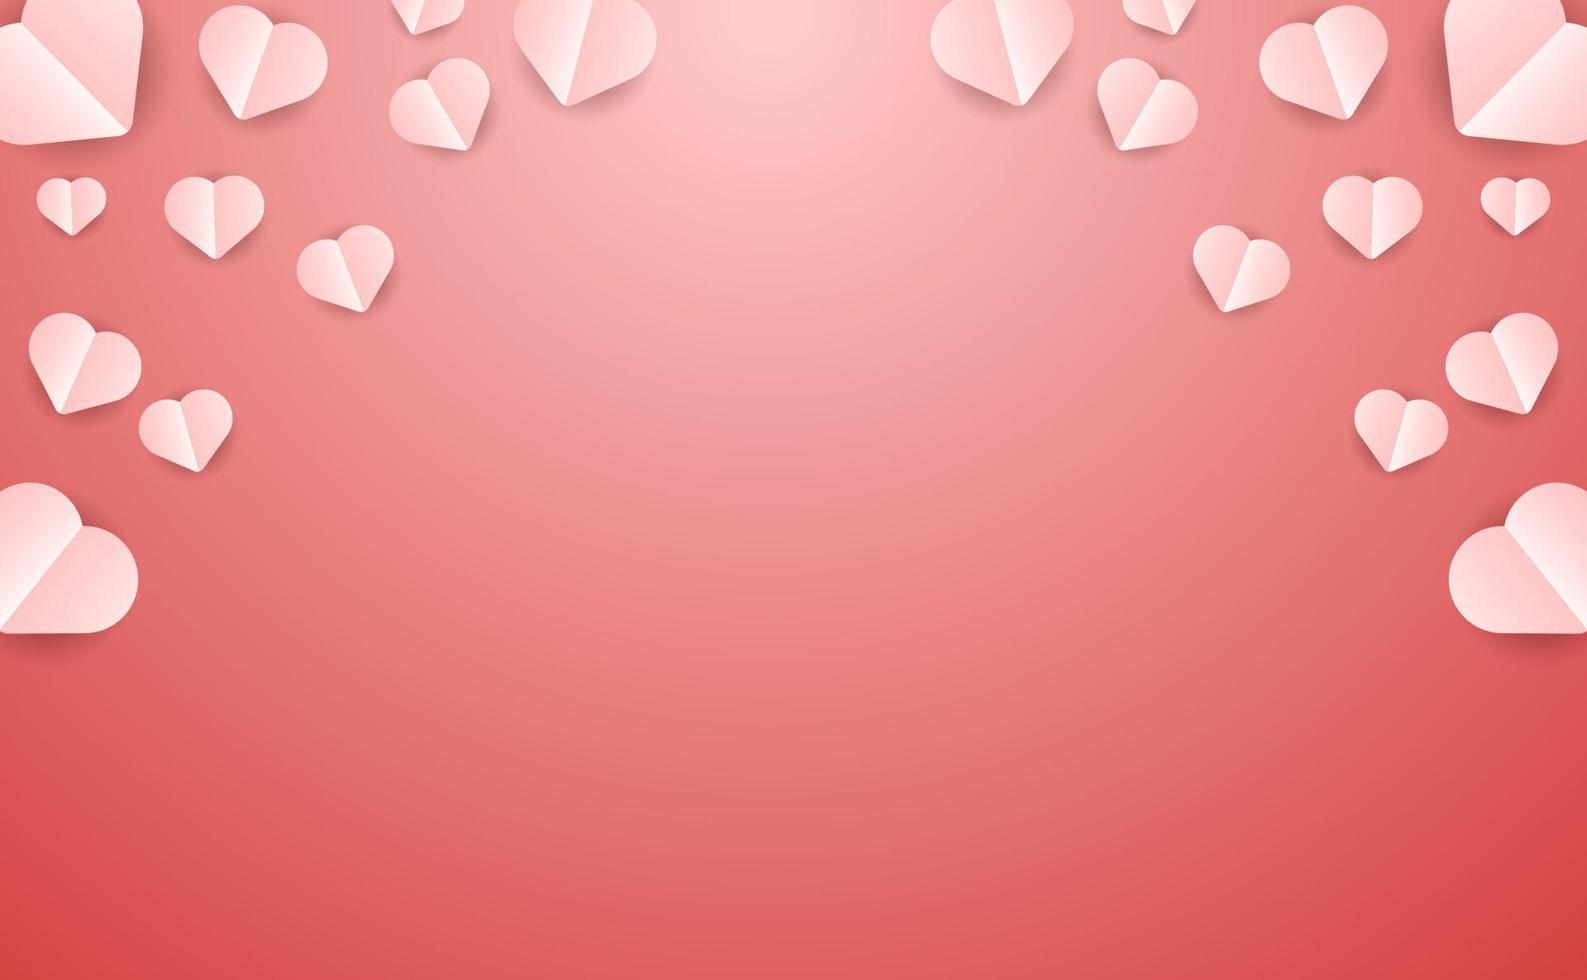 paper heart or love symbol, special valentine's day background in soft pink color vector